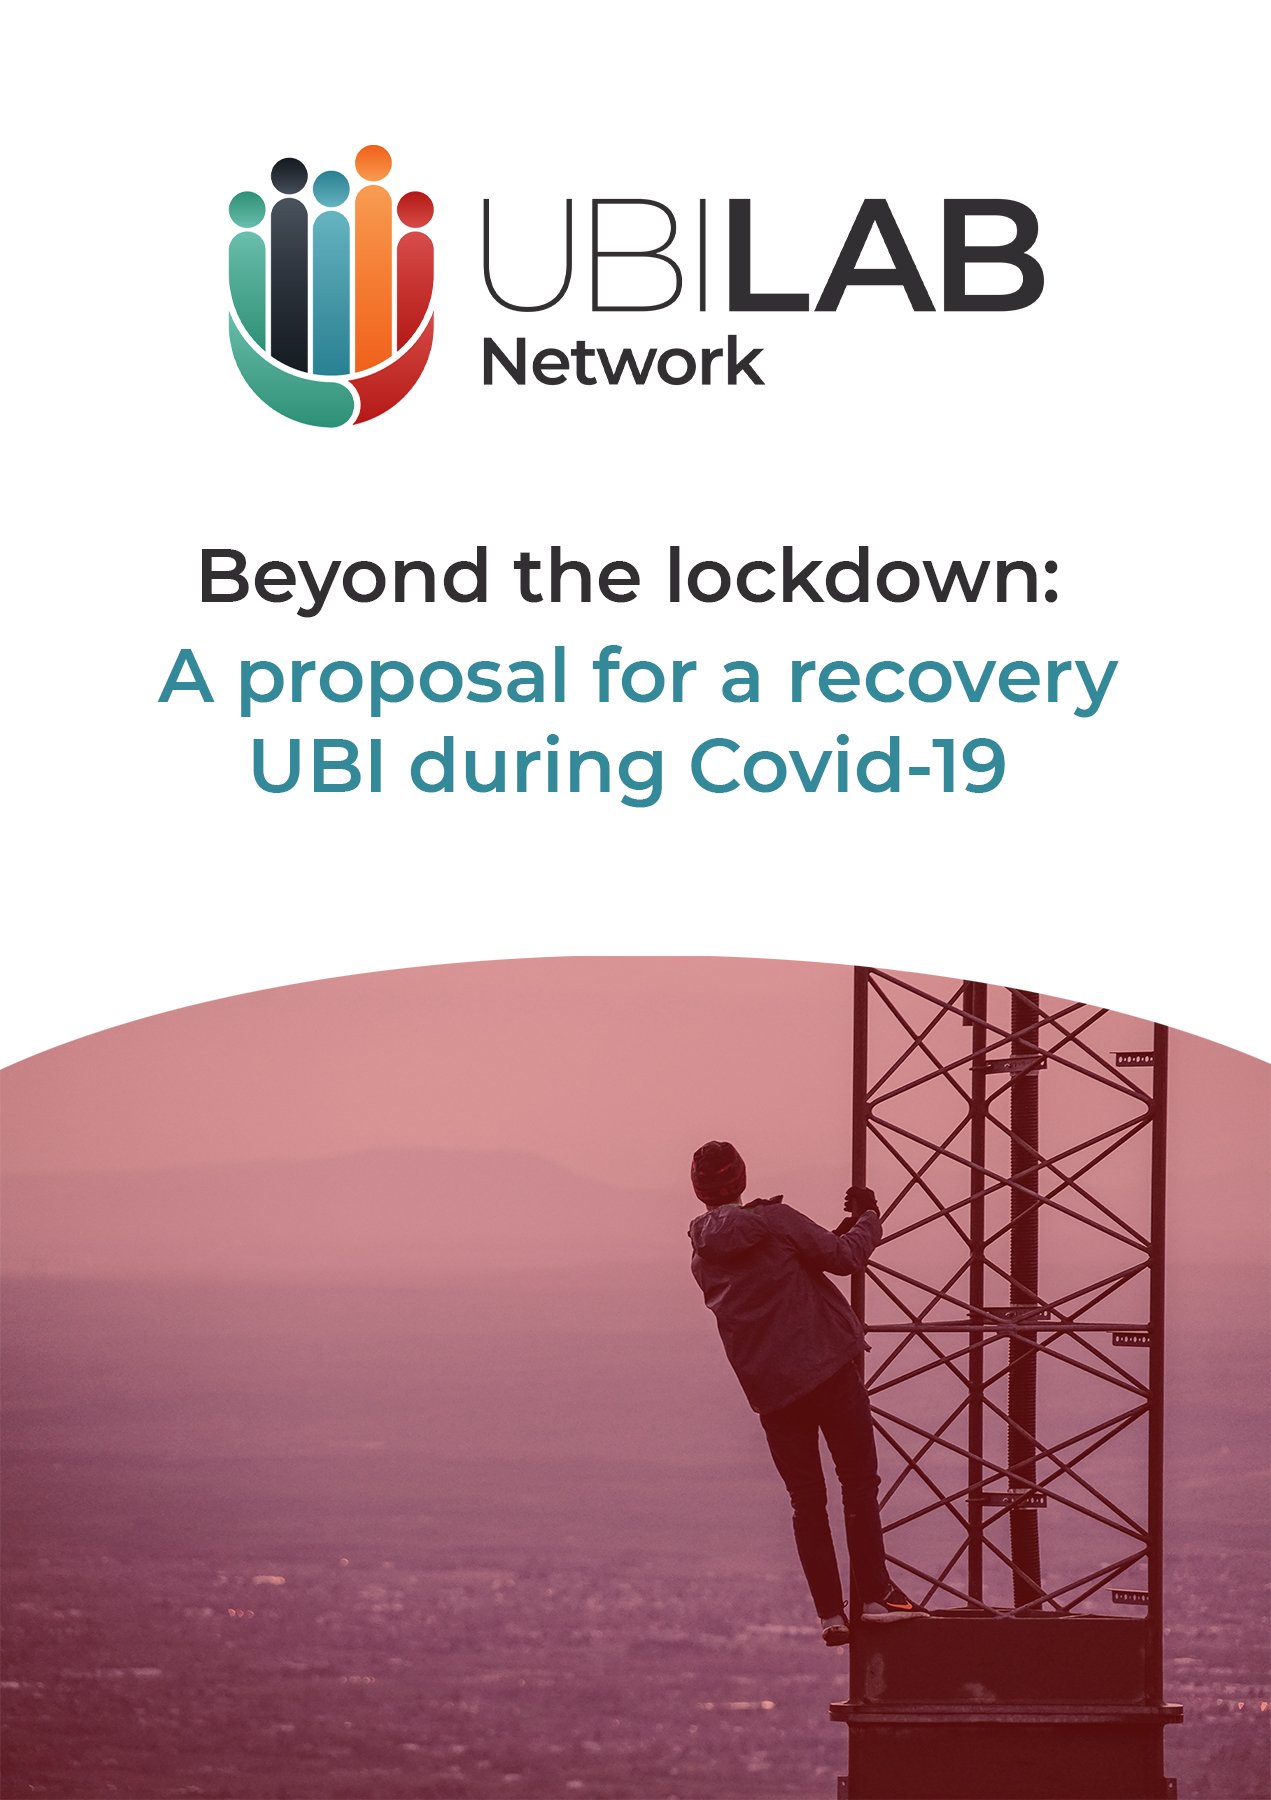 Beyond the lockdown: A proposal for a Recovery UBI during Covid-19 (Copy)